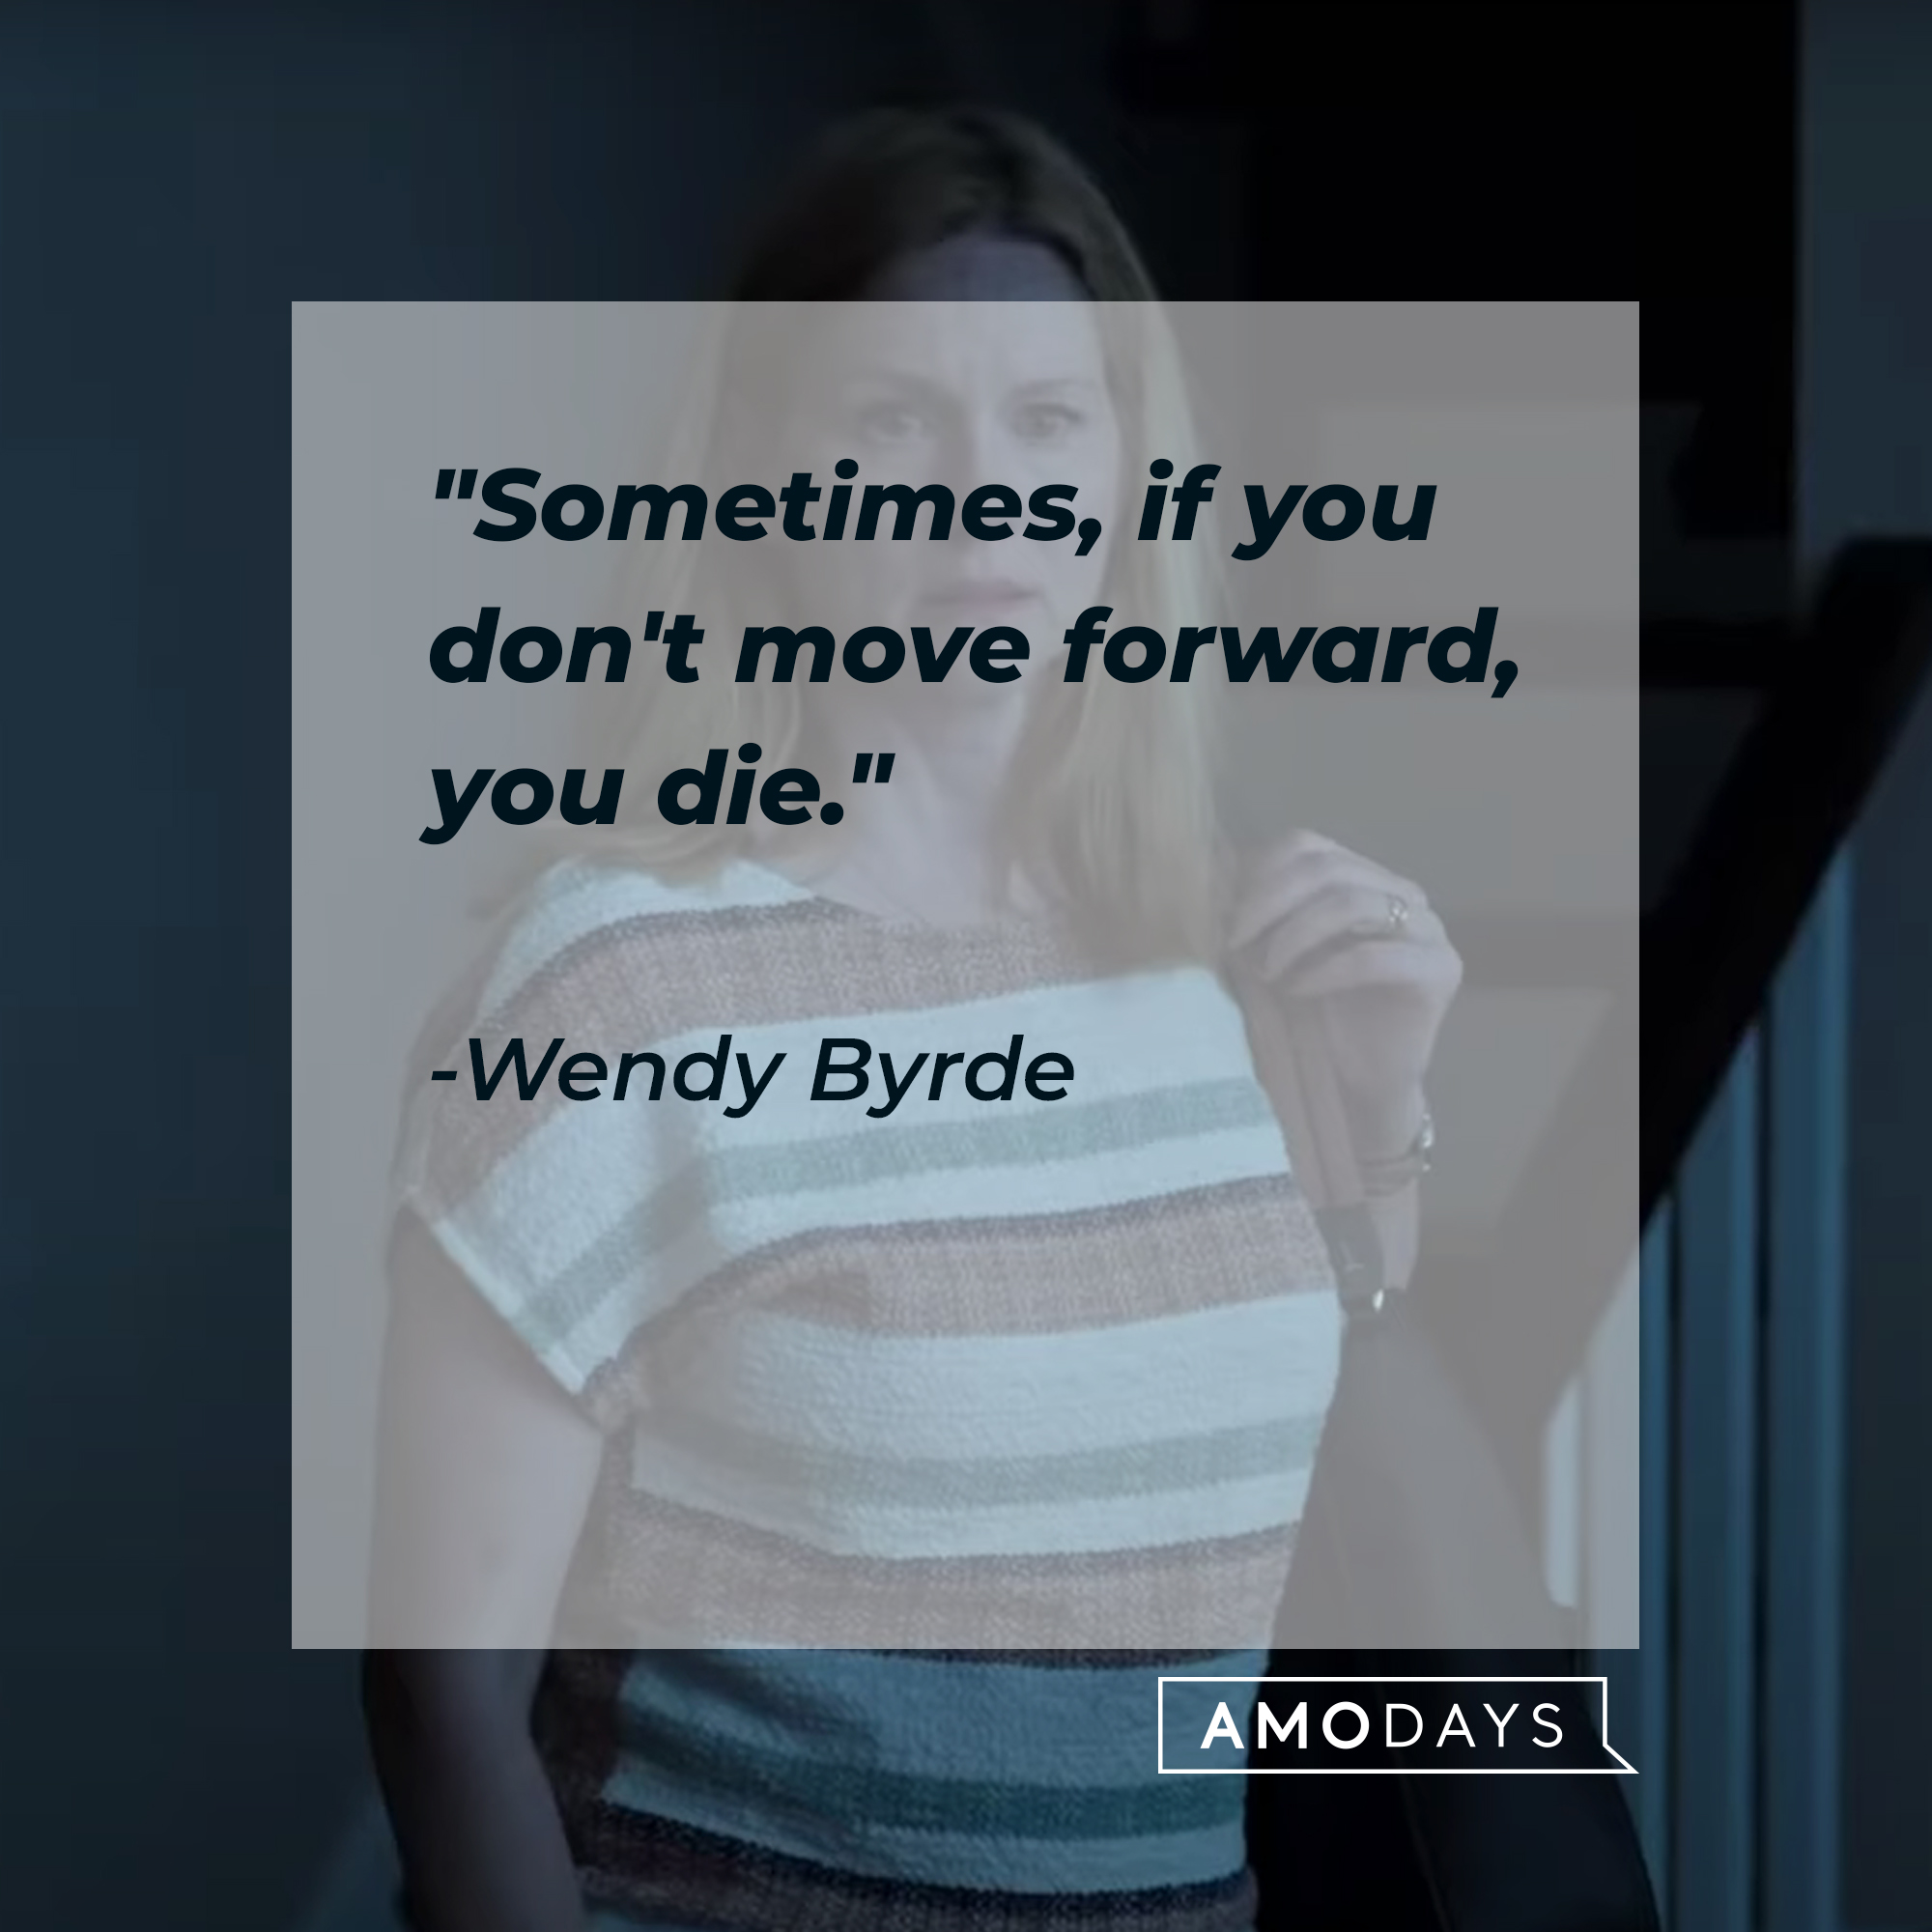 Wendy Byrde’s quote: “Sometimes, if you don't move forward, you die.” | Source: facebook.com/OzarkNetflix